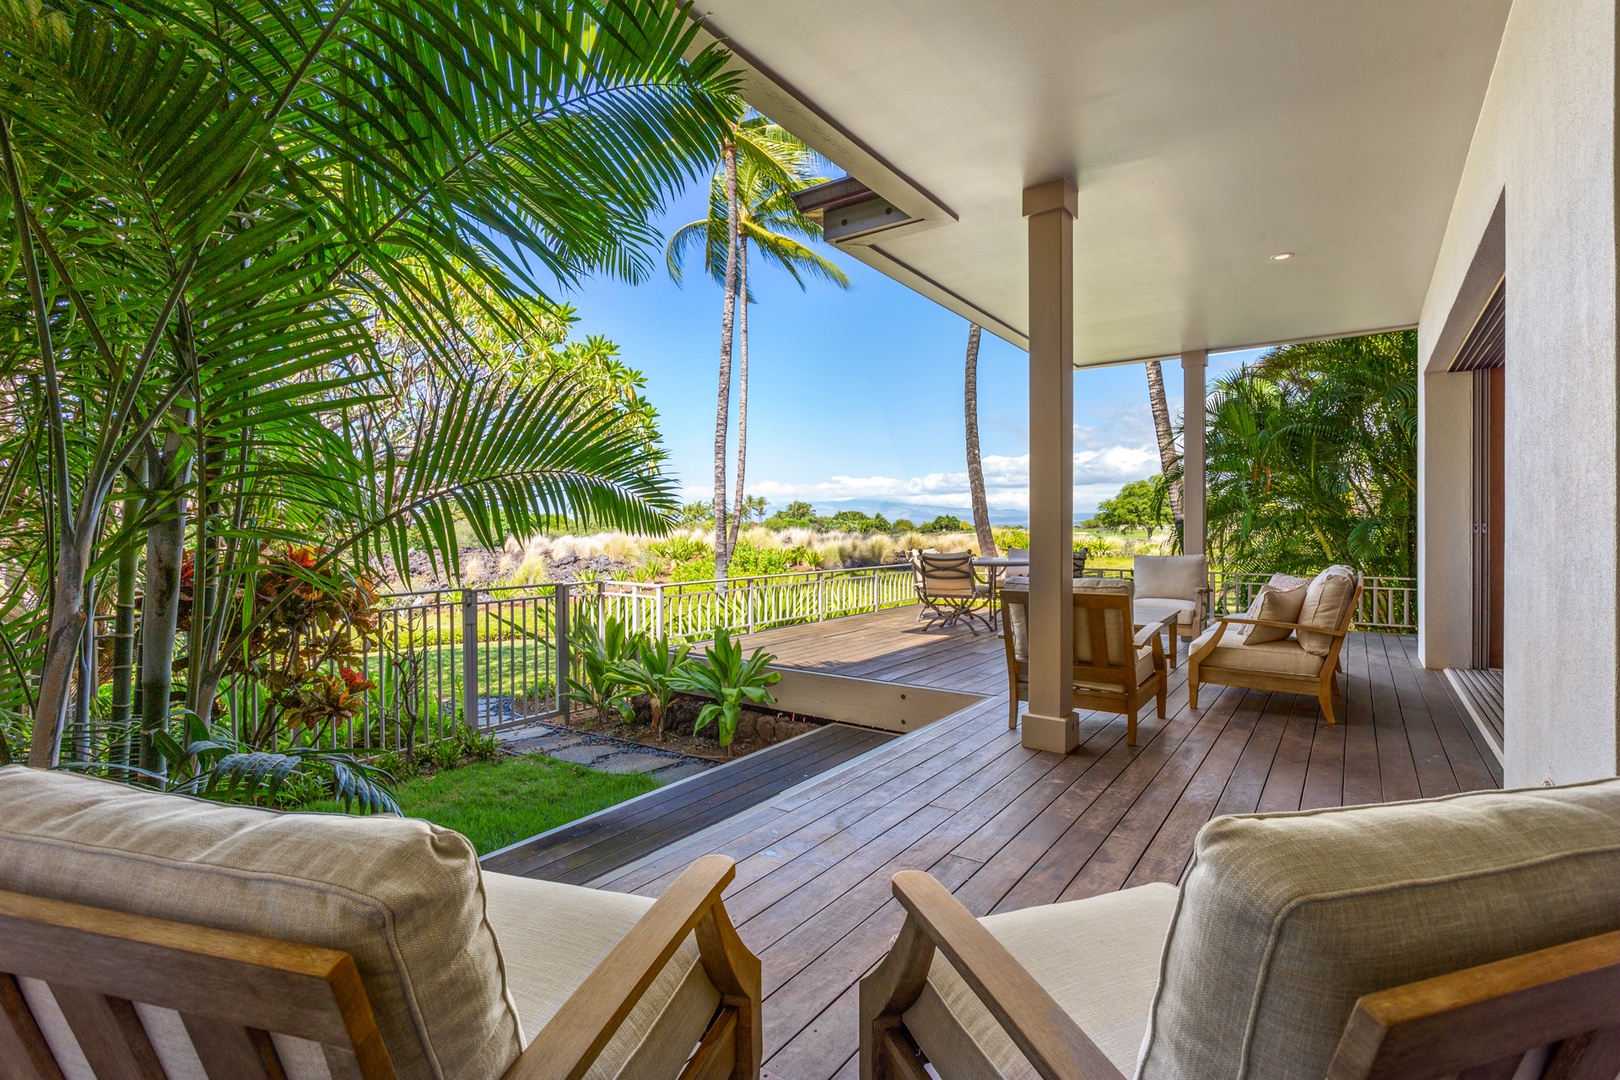 Kailua Kona Vacation Rentals, 3BD Ka'Ulu Villa (129D) at Four Seasons Resort at Hualalai - Yet another view of lower deck from primary lounge seating with steps to your own private yard.